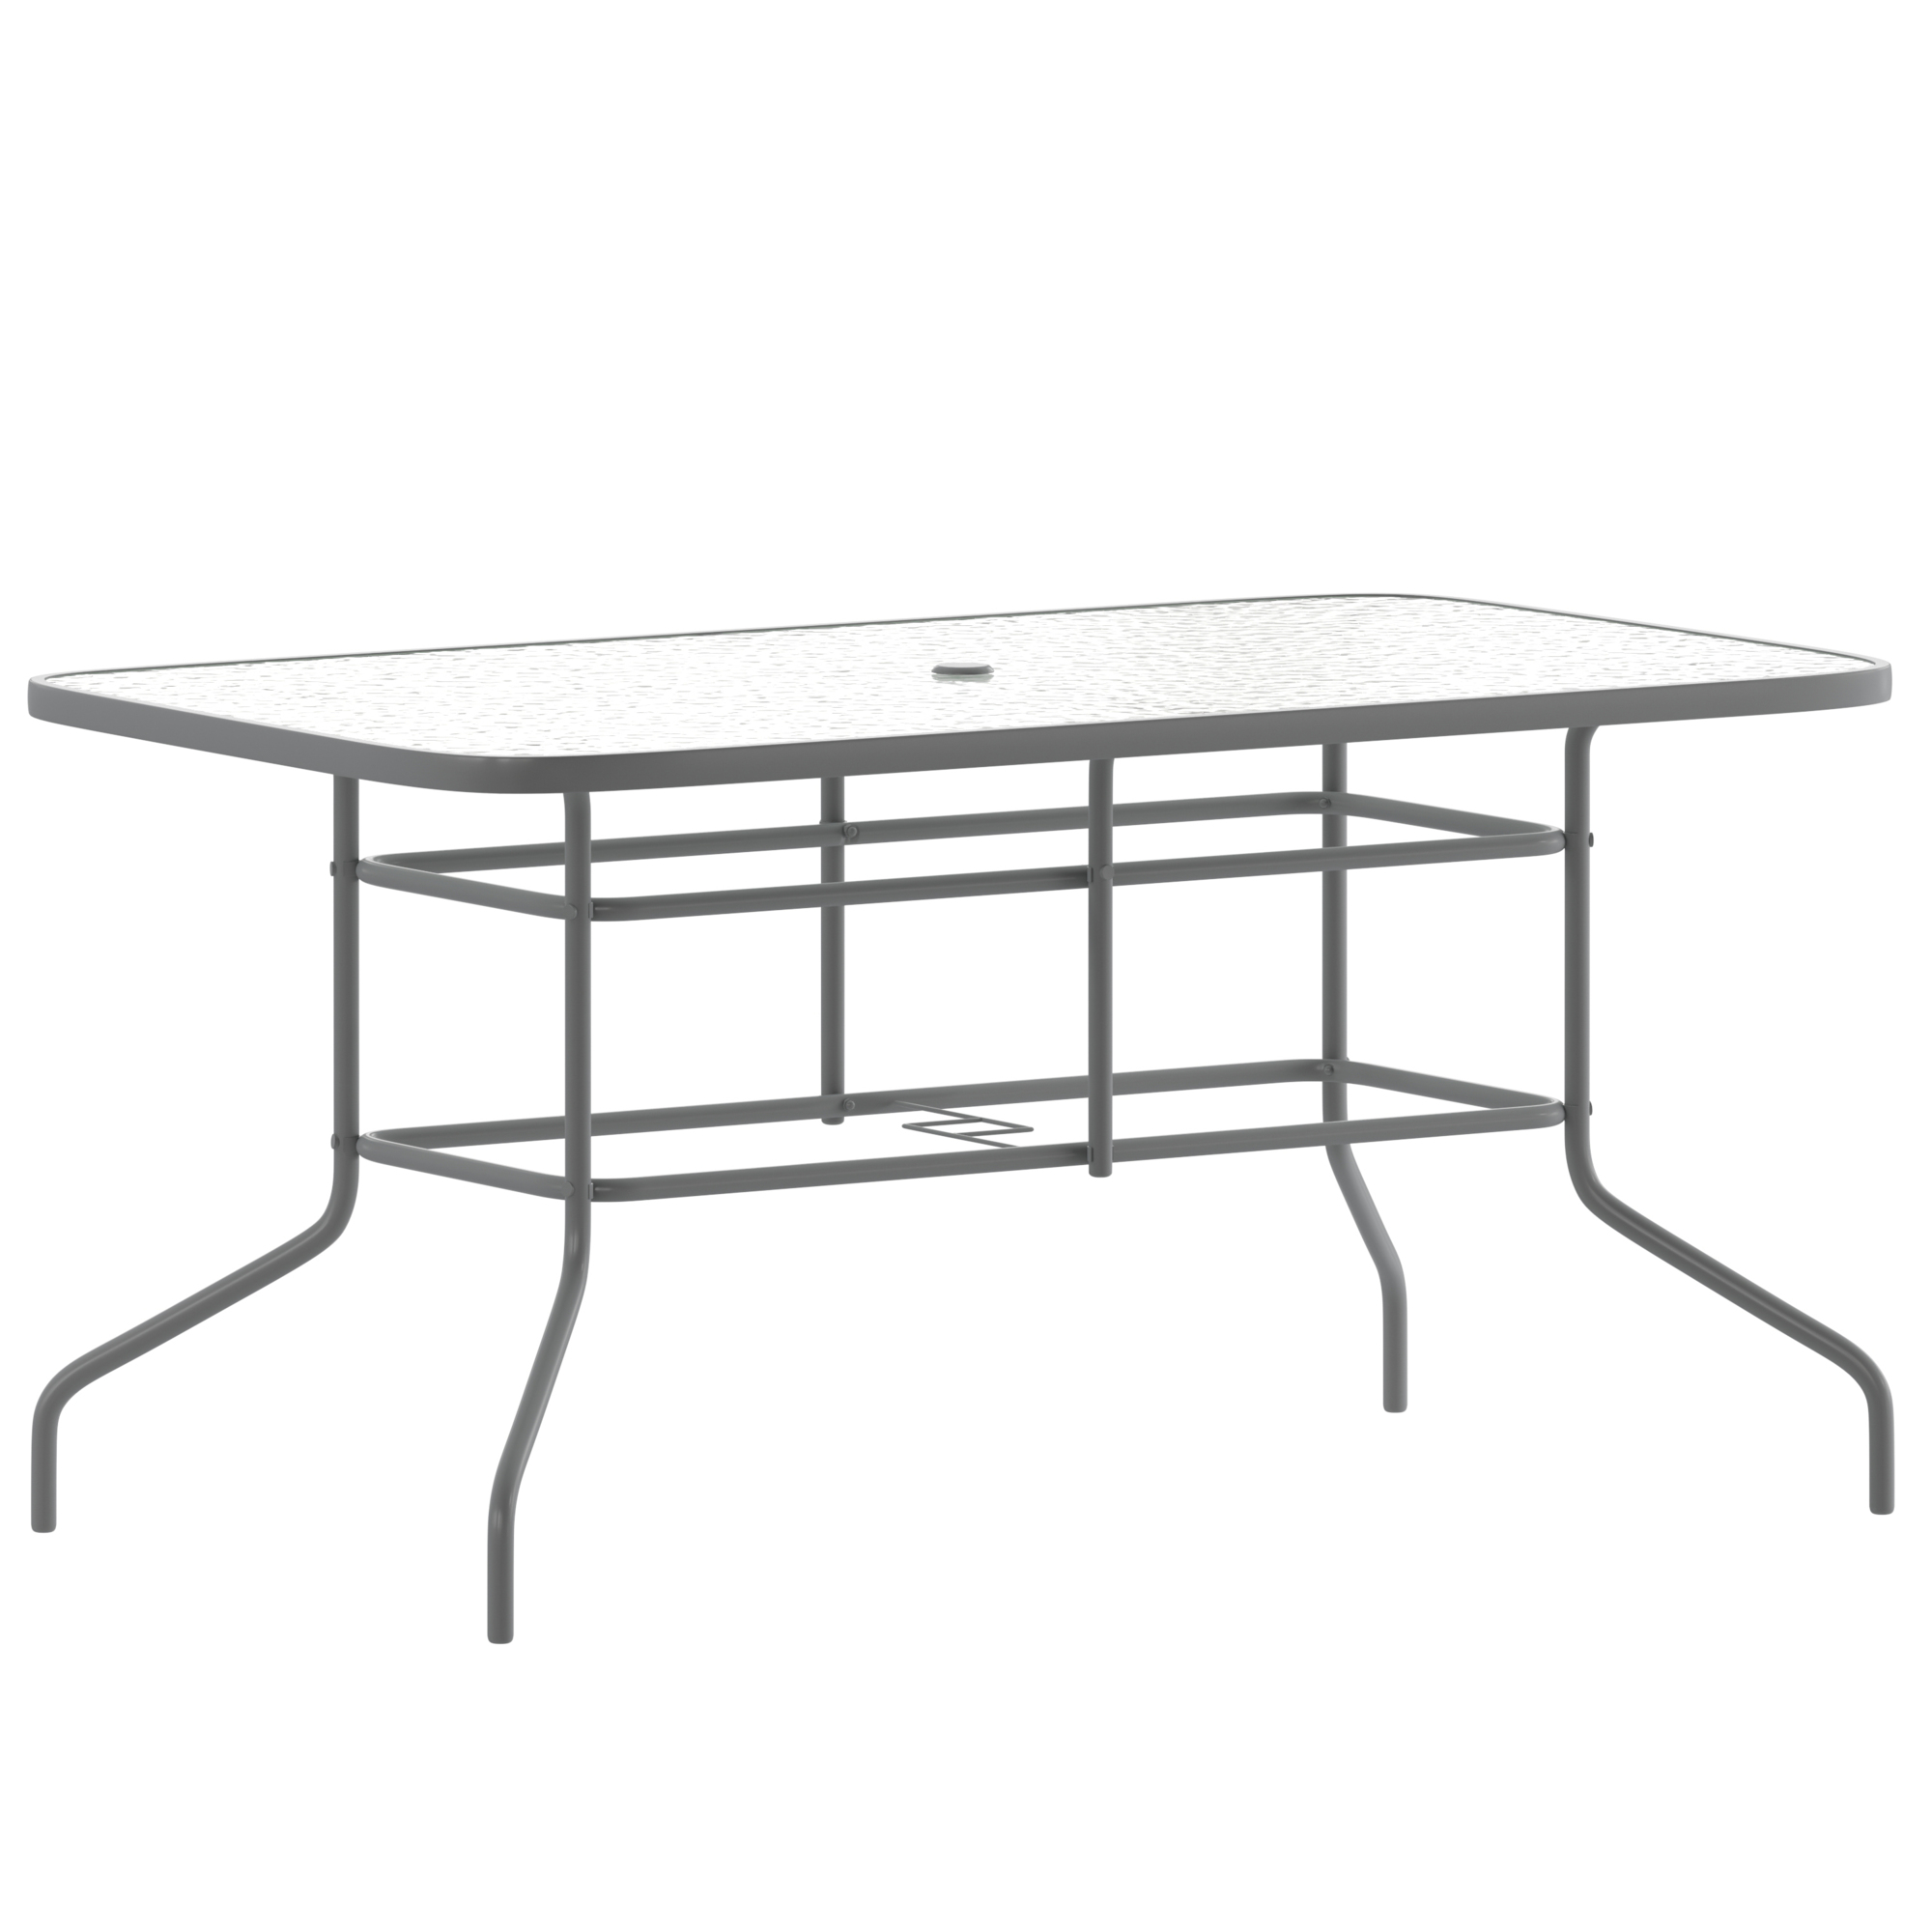 Flash Furniture, Silver 55x31.5 Glass Patio Table - Umbrella Hole, Table Shape Rectangle, Primary Color Gray, Height 27.5 in, Model TLH089SV